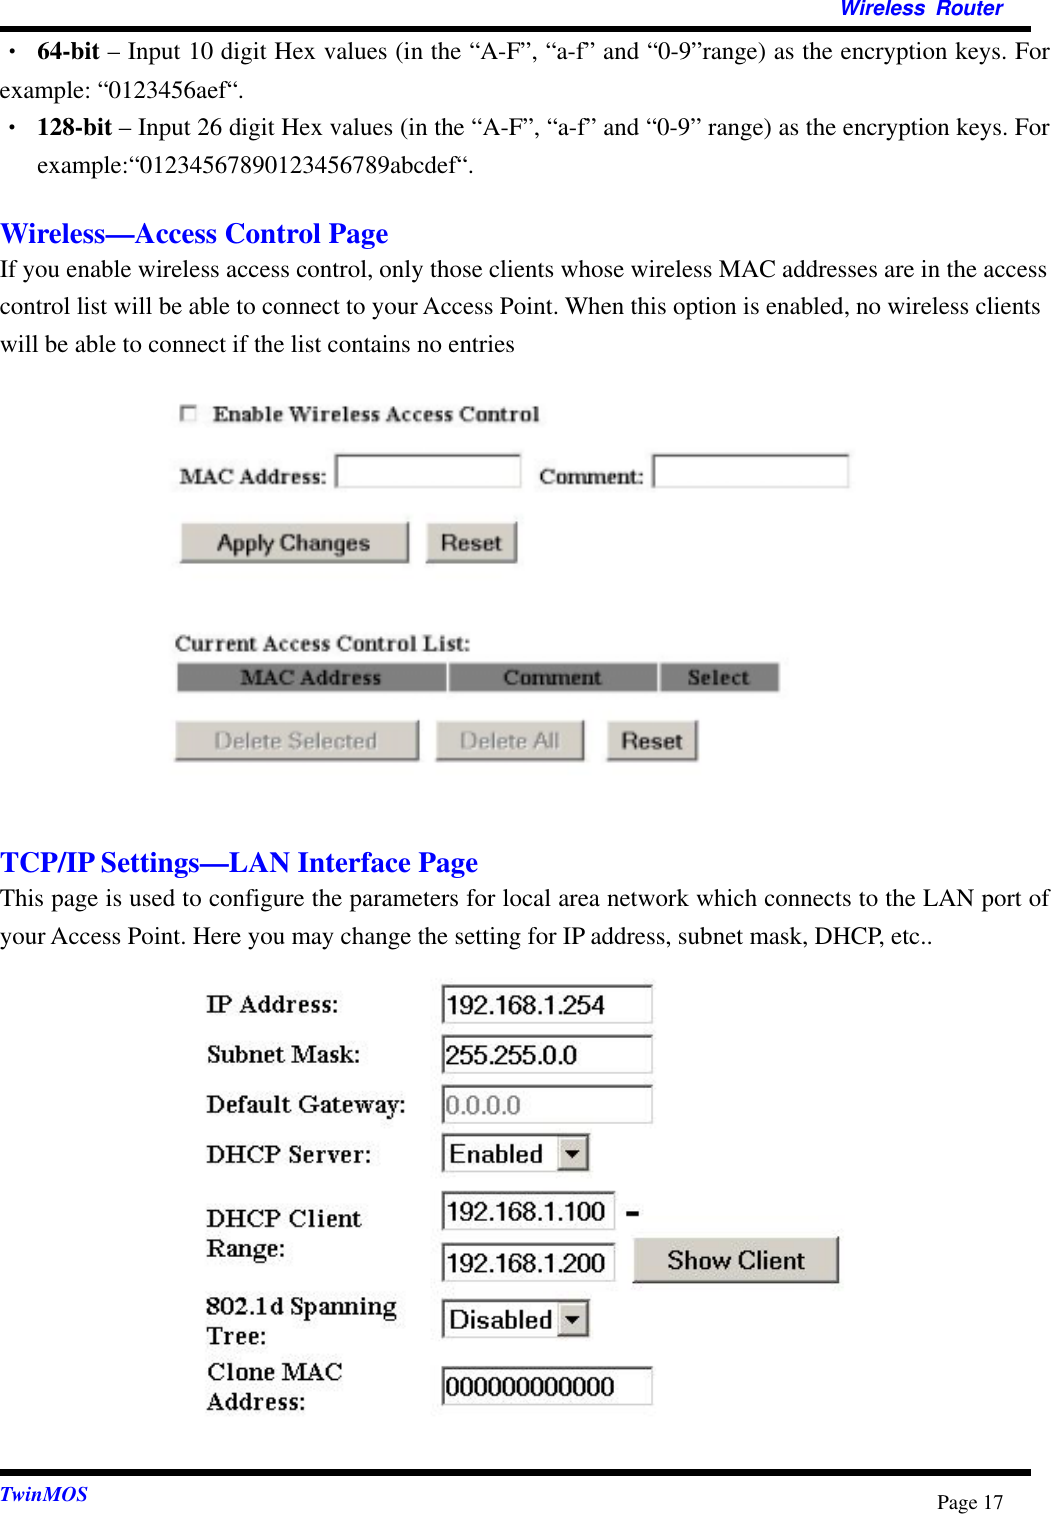   Wireless Router  TwinMOS  Page 17• 64-bit – Input 10 digit Hex values (in the “A-F”, “a-f” and “0-9”range) as the encryption keys. For example: “0123456aef“. •  128-bit – Input 26 digit Hex values (in the “A-F”, “a-f” and “0-9” range) as the encryption keys. For example:“01234567890123456789abcdef“.  Wireless—Access Control Page If you enable wireless access control, only those clients whose wireless MAC addresses are in the access control list will be able to connect to your Access Point. When this option is enabled, no wireless clients will be able to connect if the list contains no entries              TCP/IP Settings—LAN Interface Page This page is used to configure the parameters for local area network which connects to the LAN port of your Access Point. Here you may change the setting for IP address, subnet mask, DHCP, etc..              